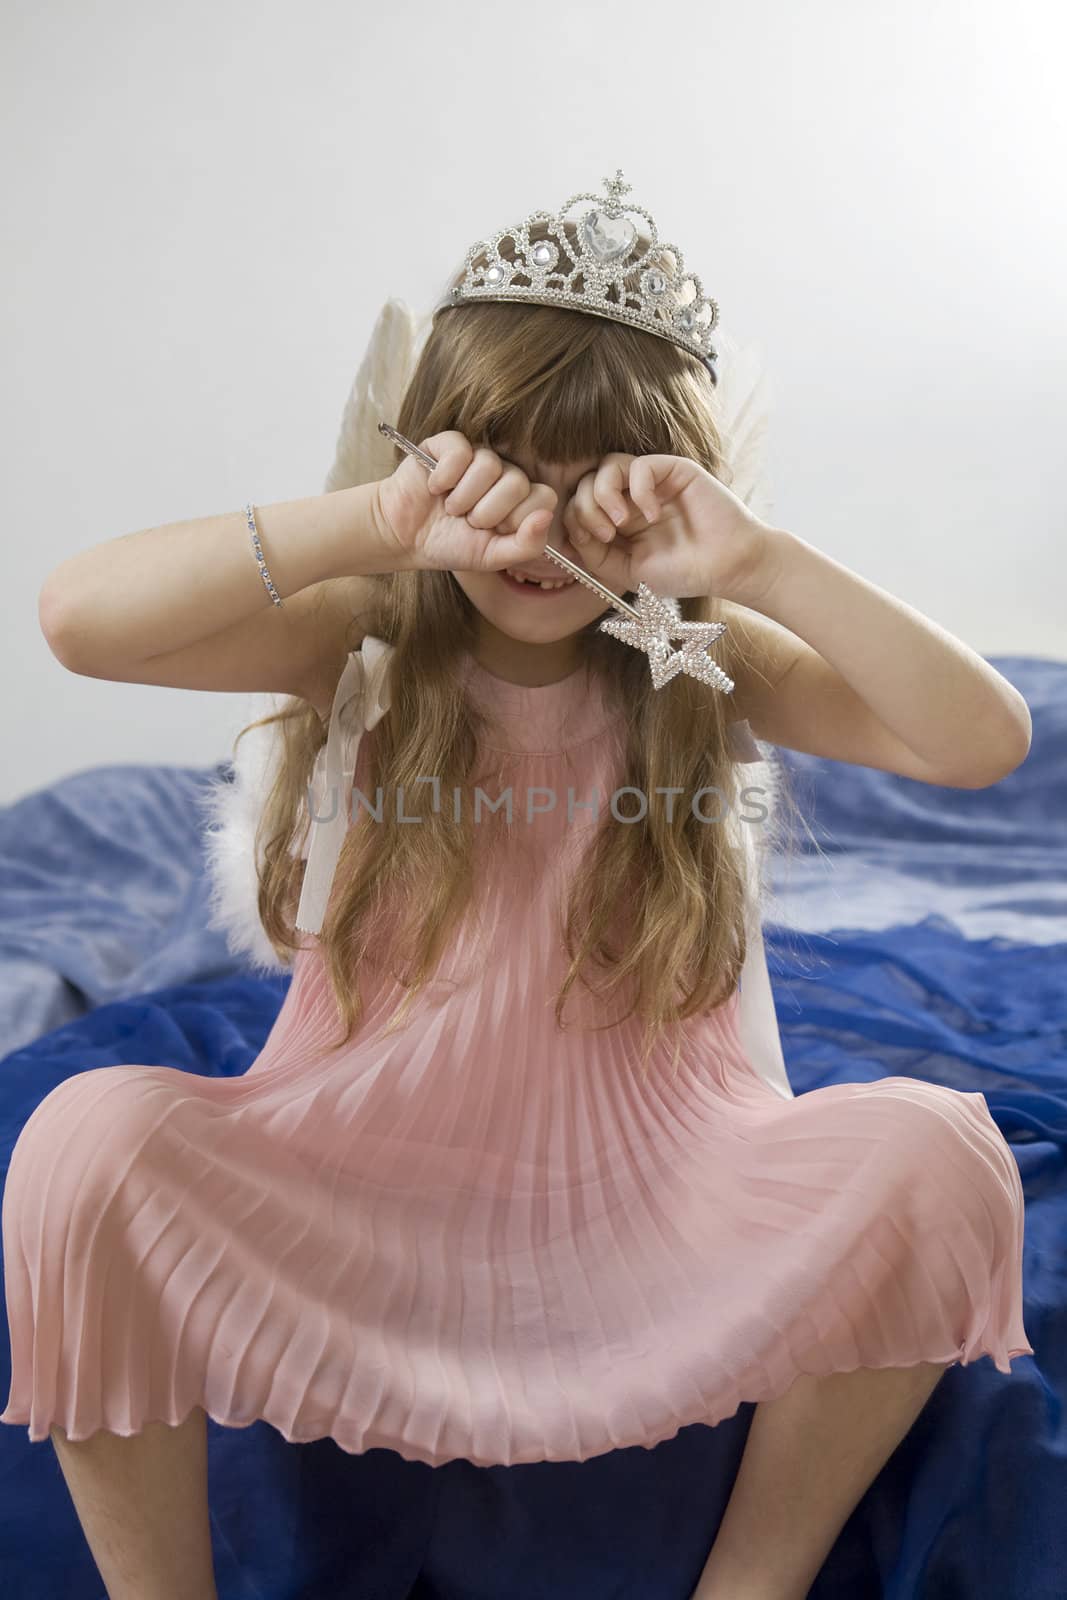 Holiday was bad. Little cute girl seven years old wearing angel`s wing and crown sitting on bed